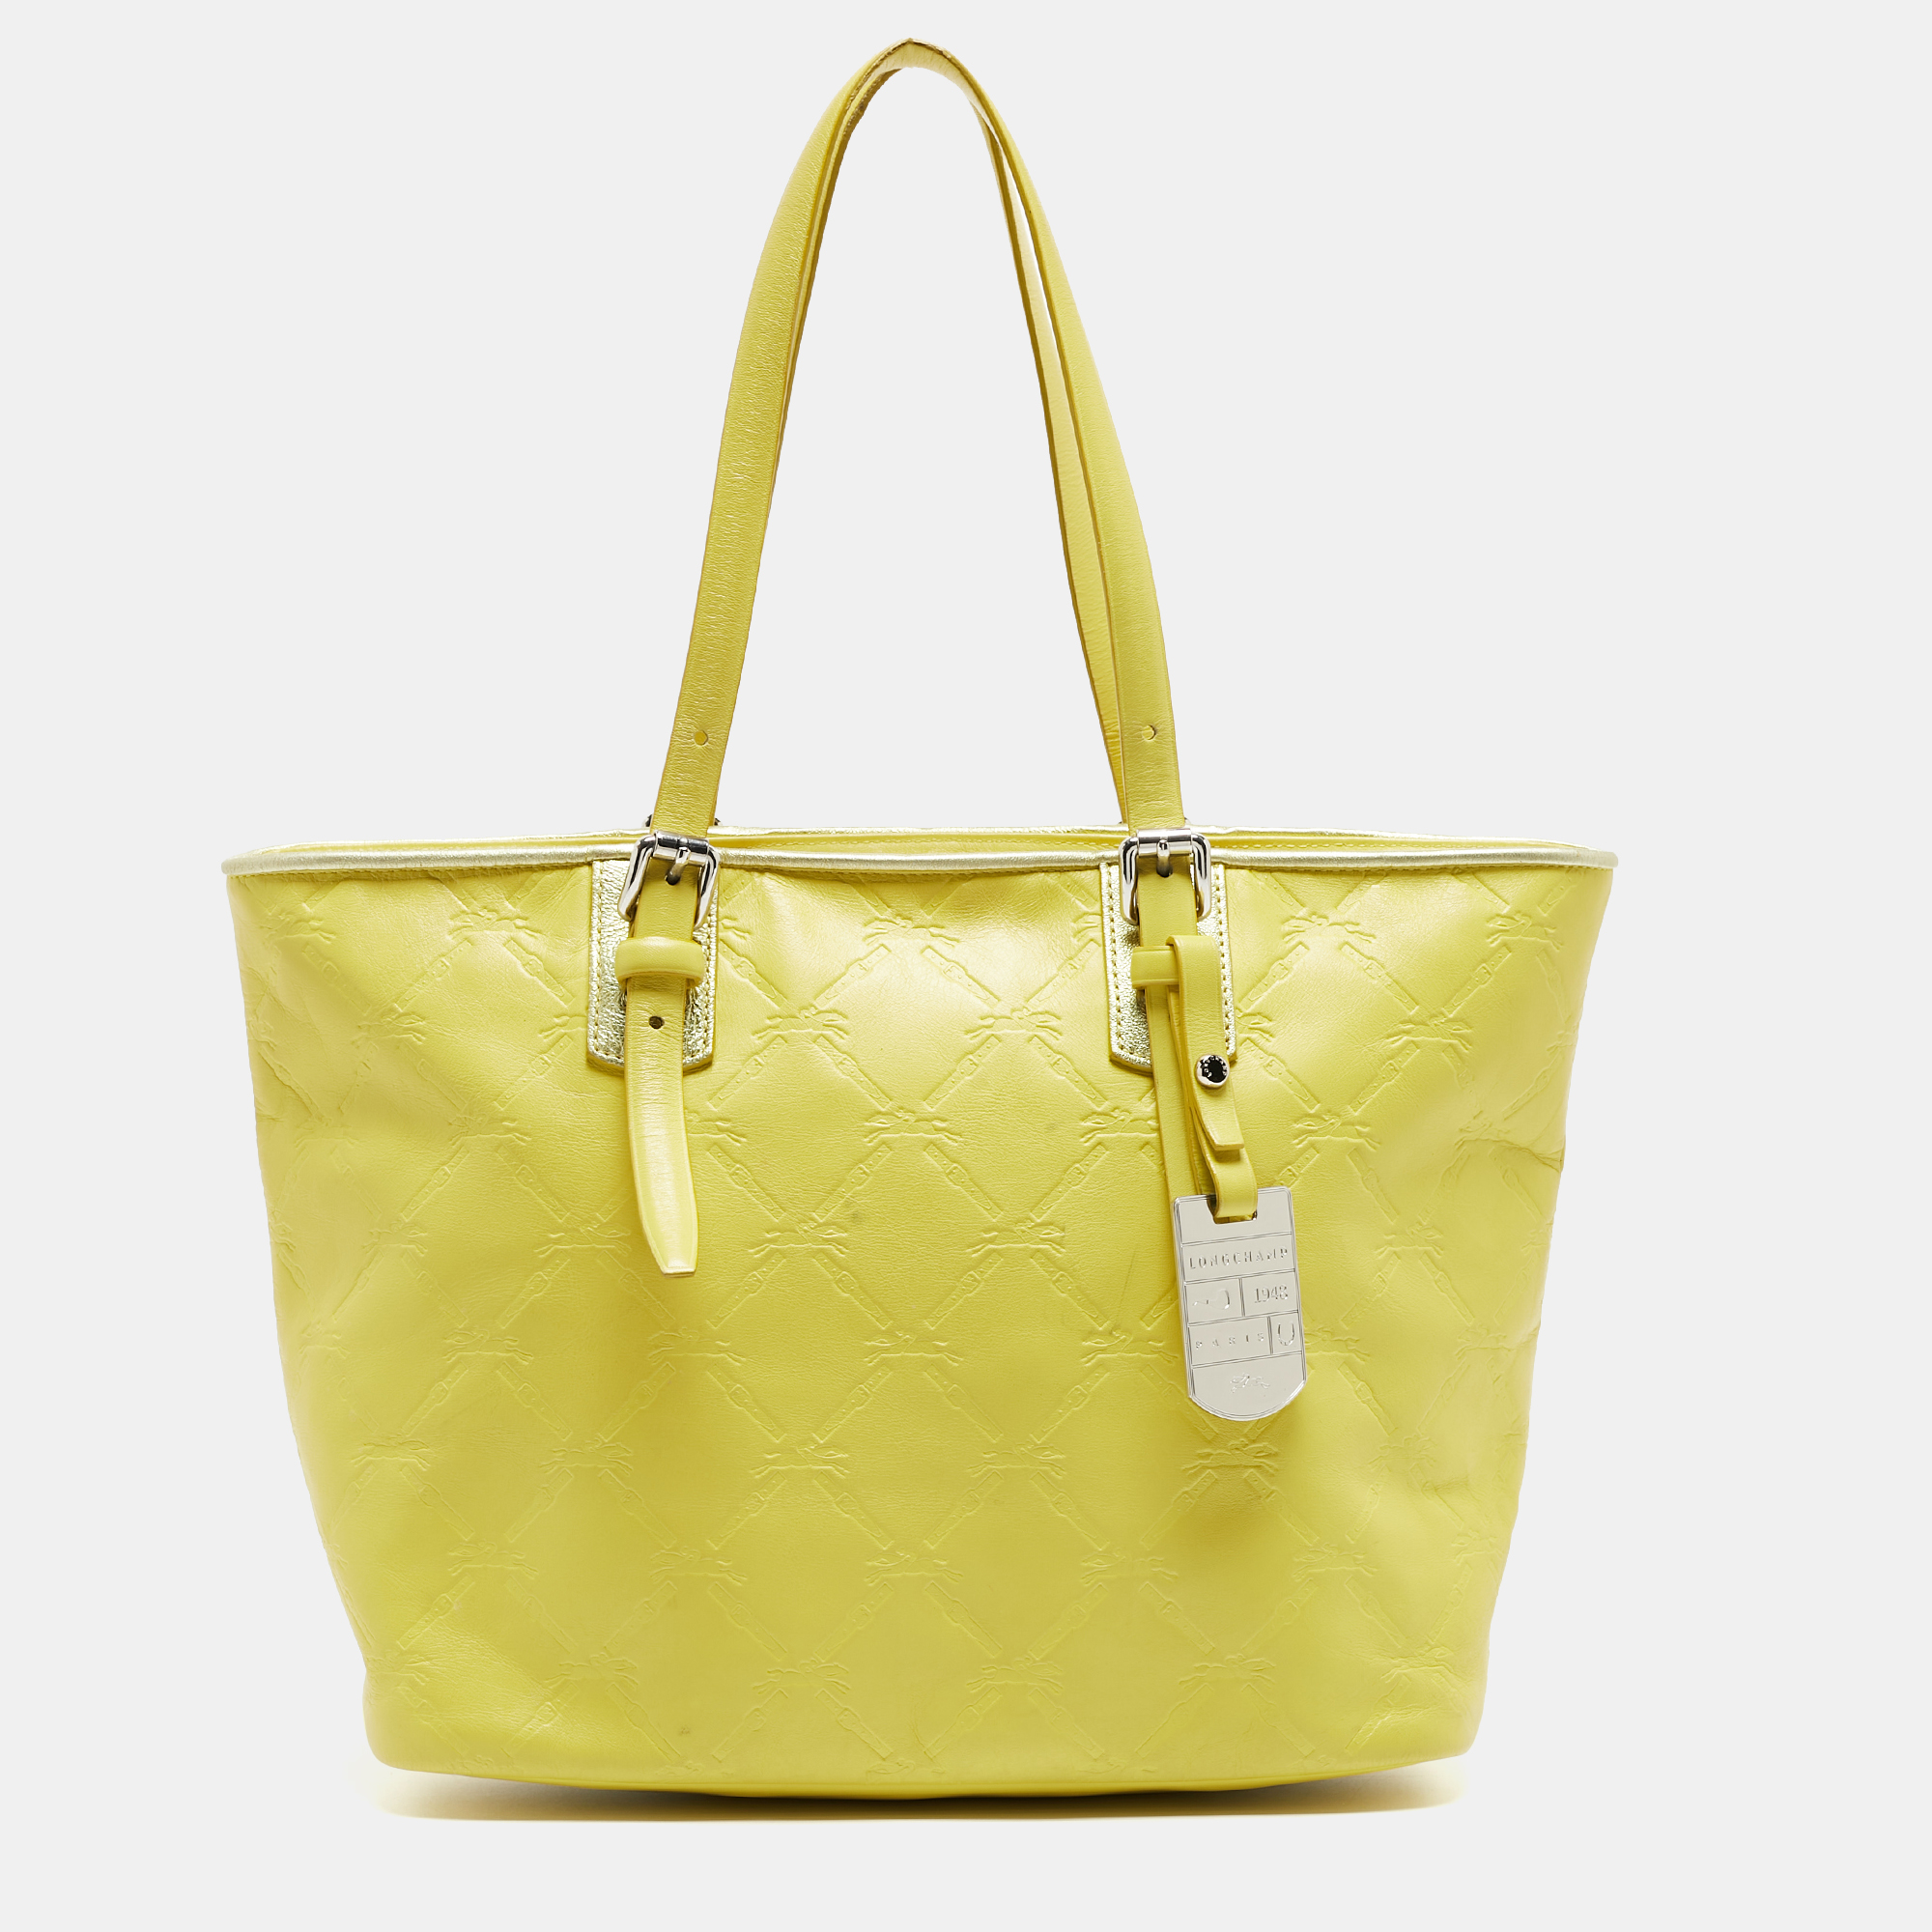 Pre-owned Longchamp Yellow Leather Medium Lm Cuir Shopper Tote